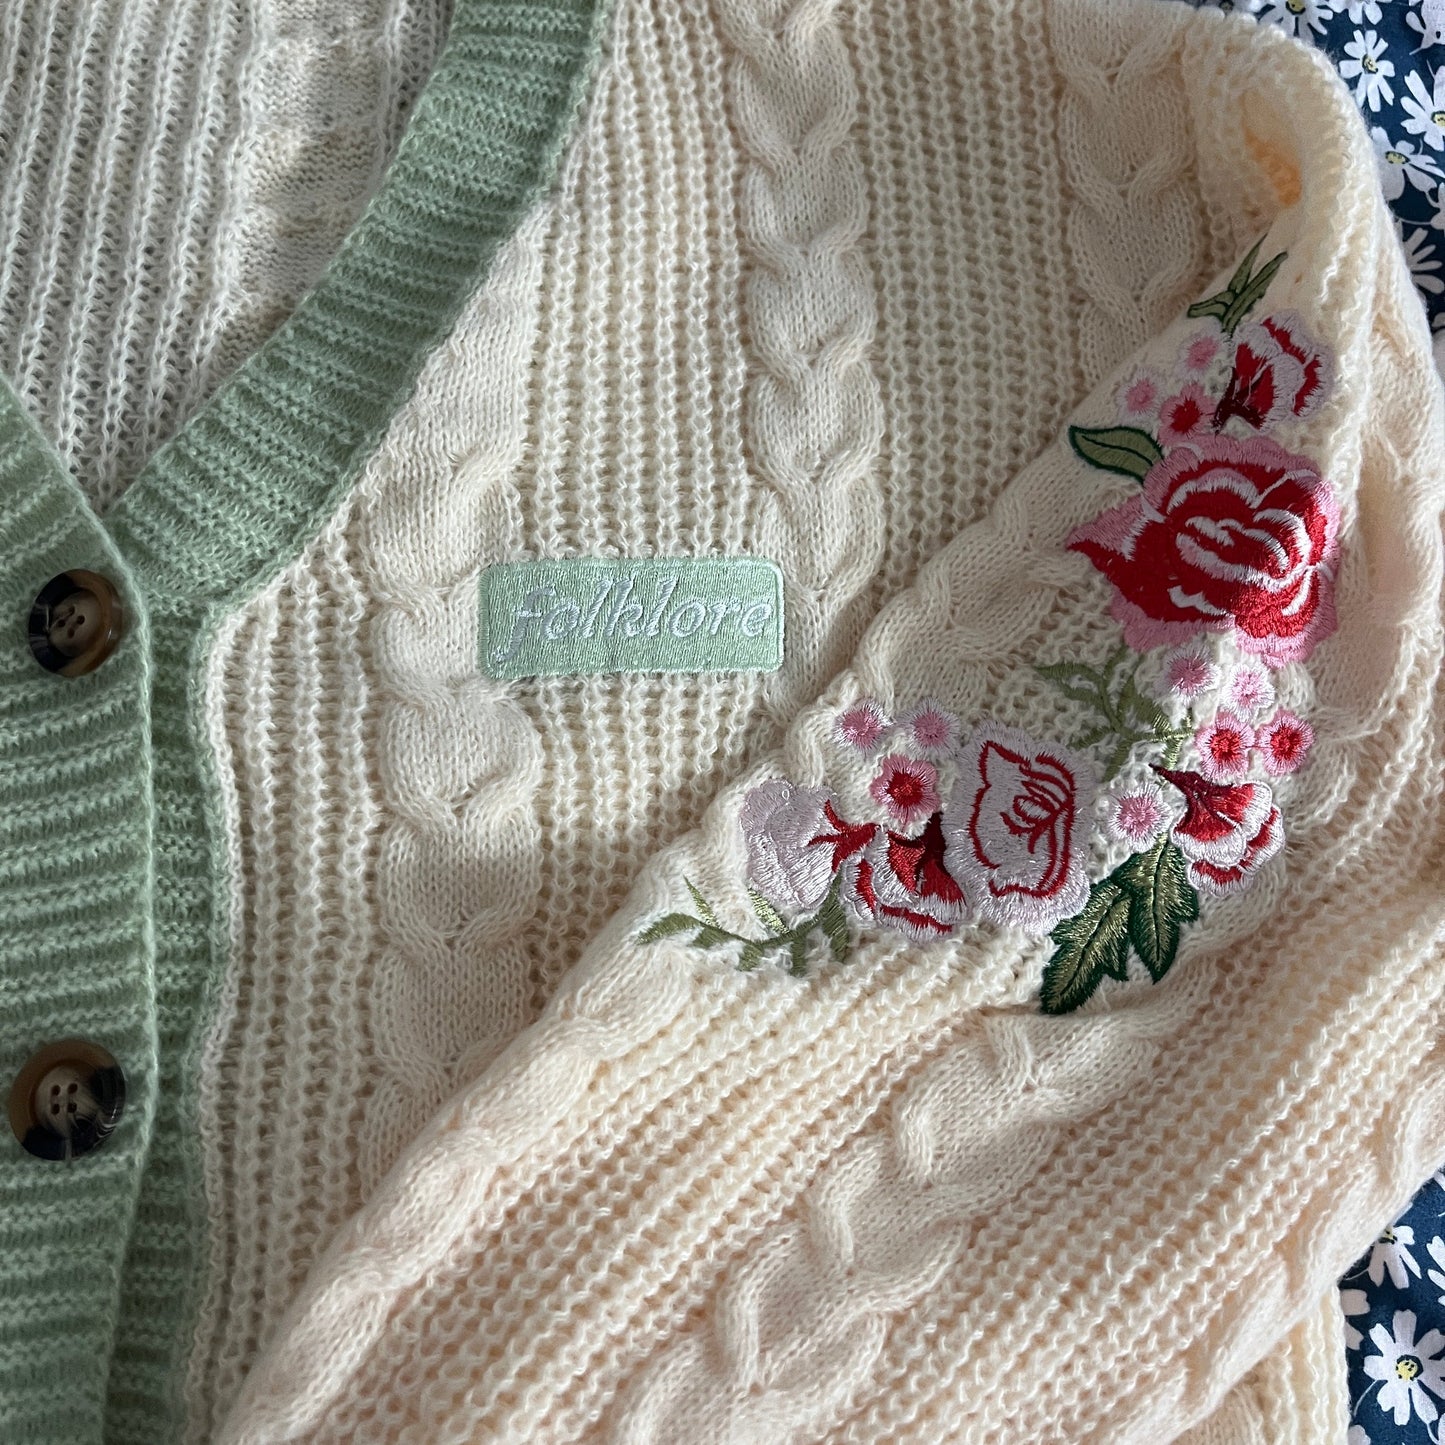 cardigan betty with embroidered flower and folklore patch